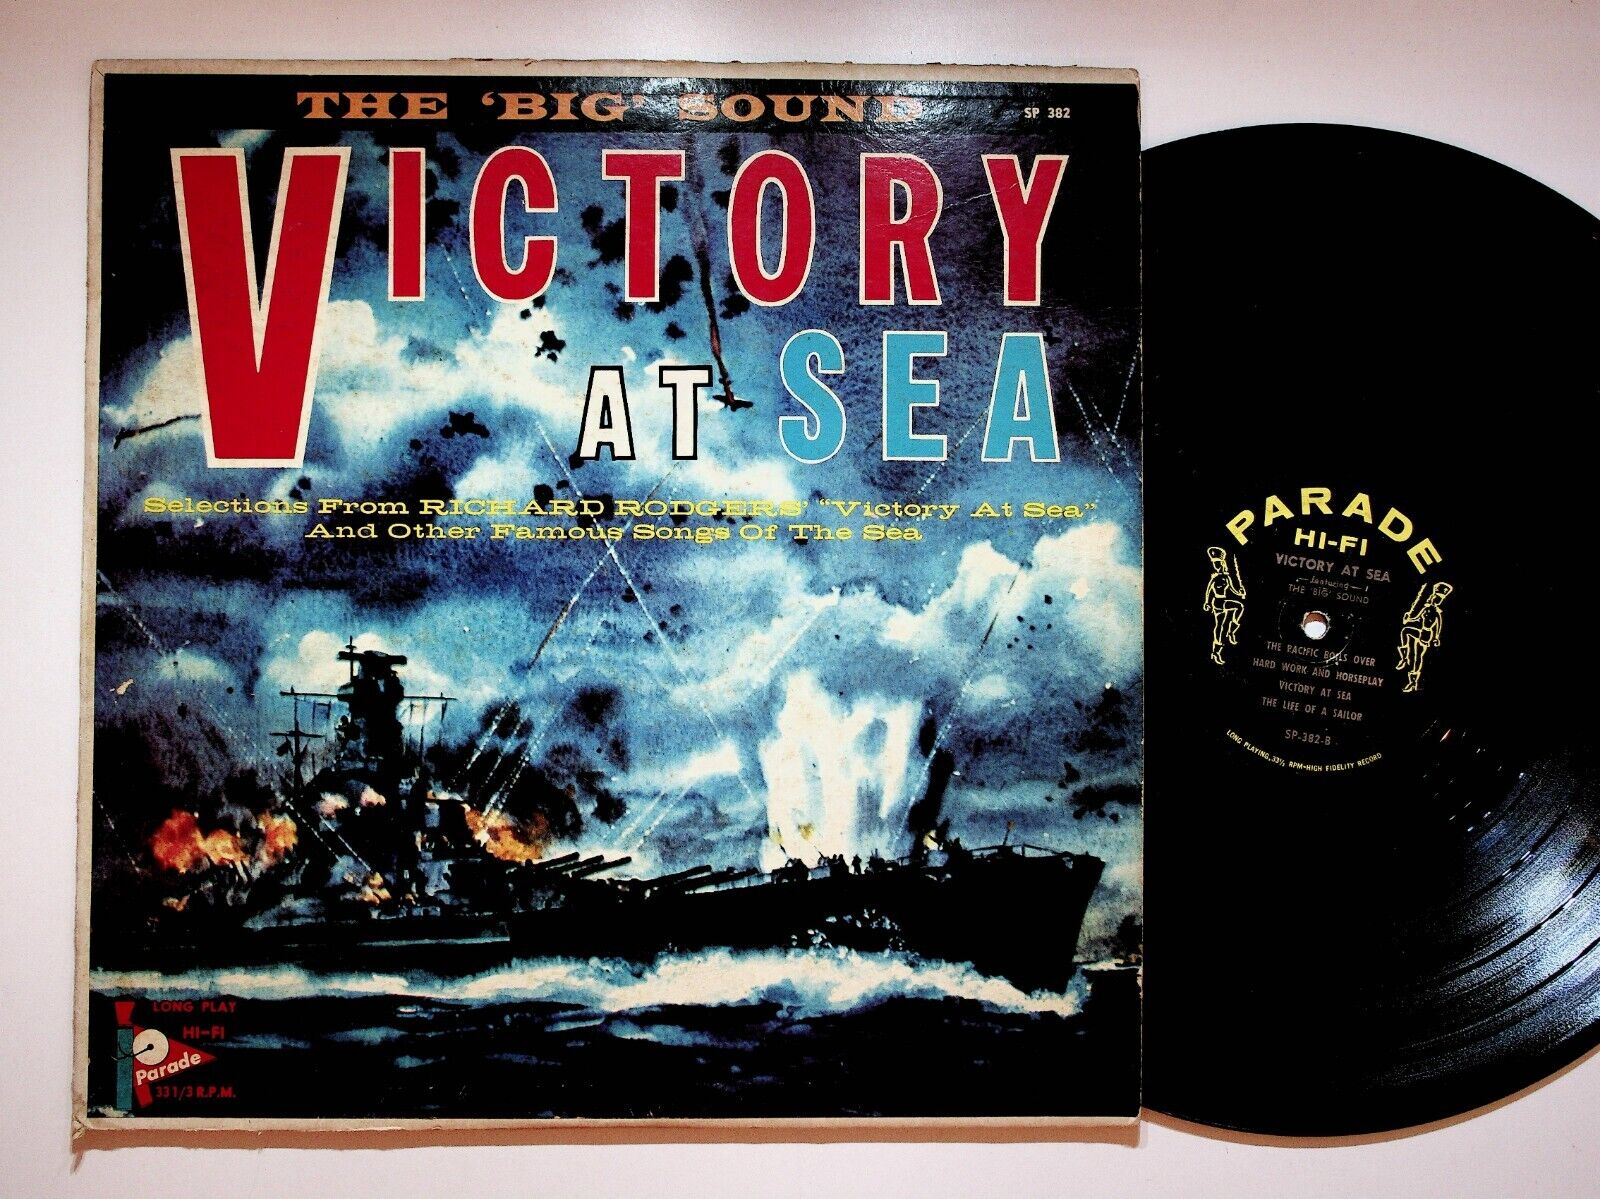 1961 Victory at Sea Richard Rodgers WWII US Navy Vinyl LP Record Parade SP 382